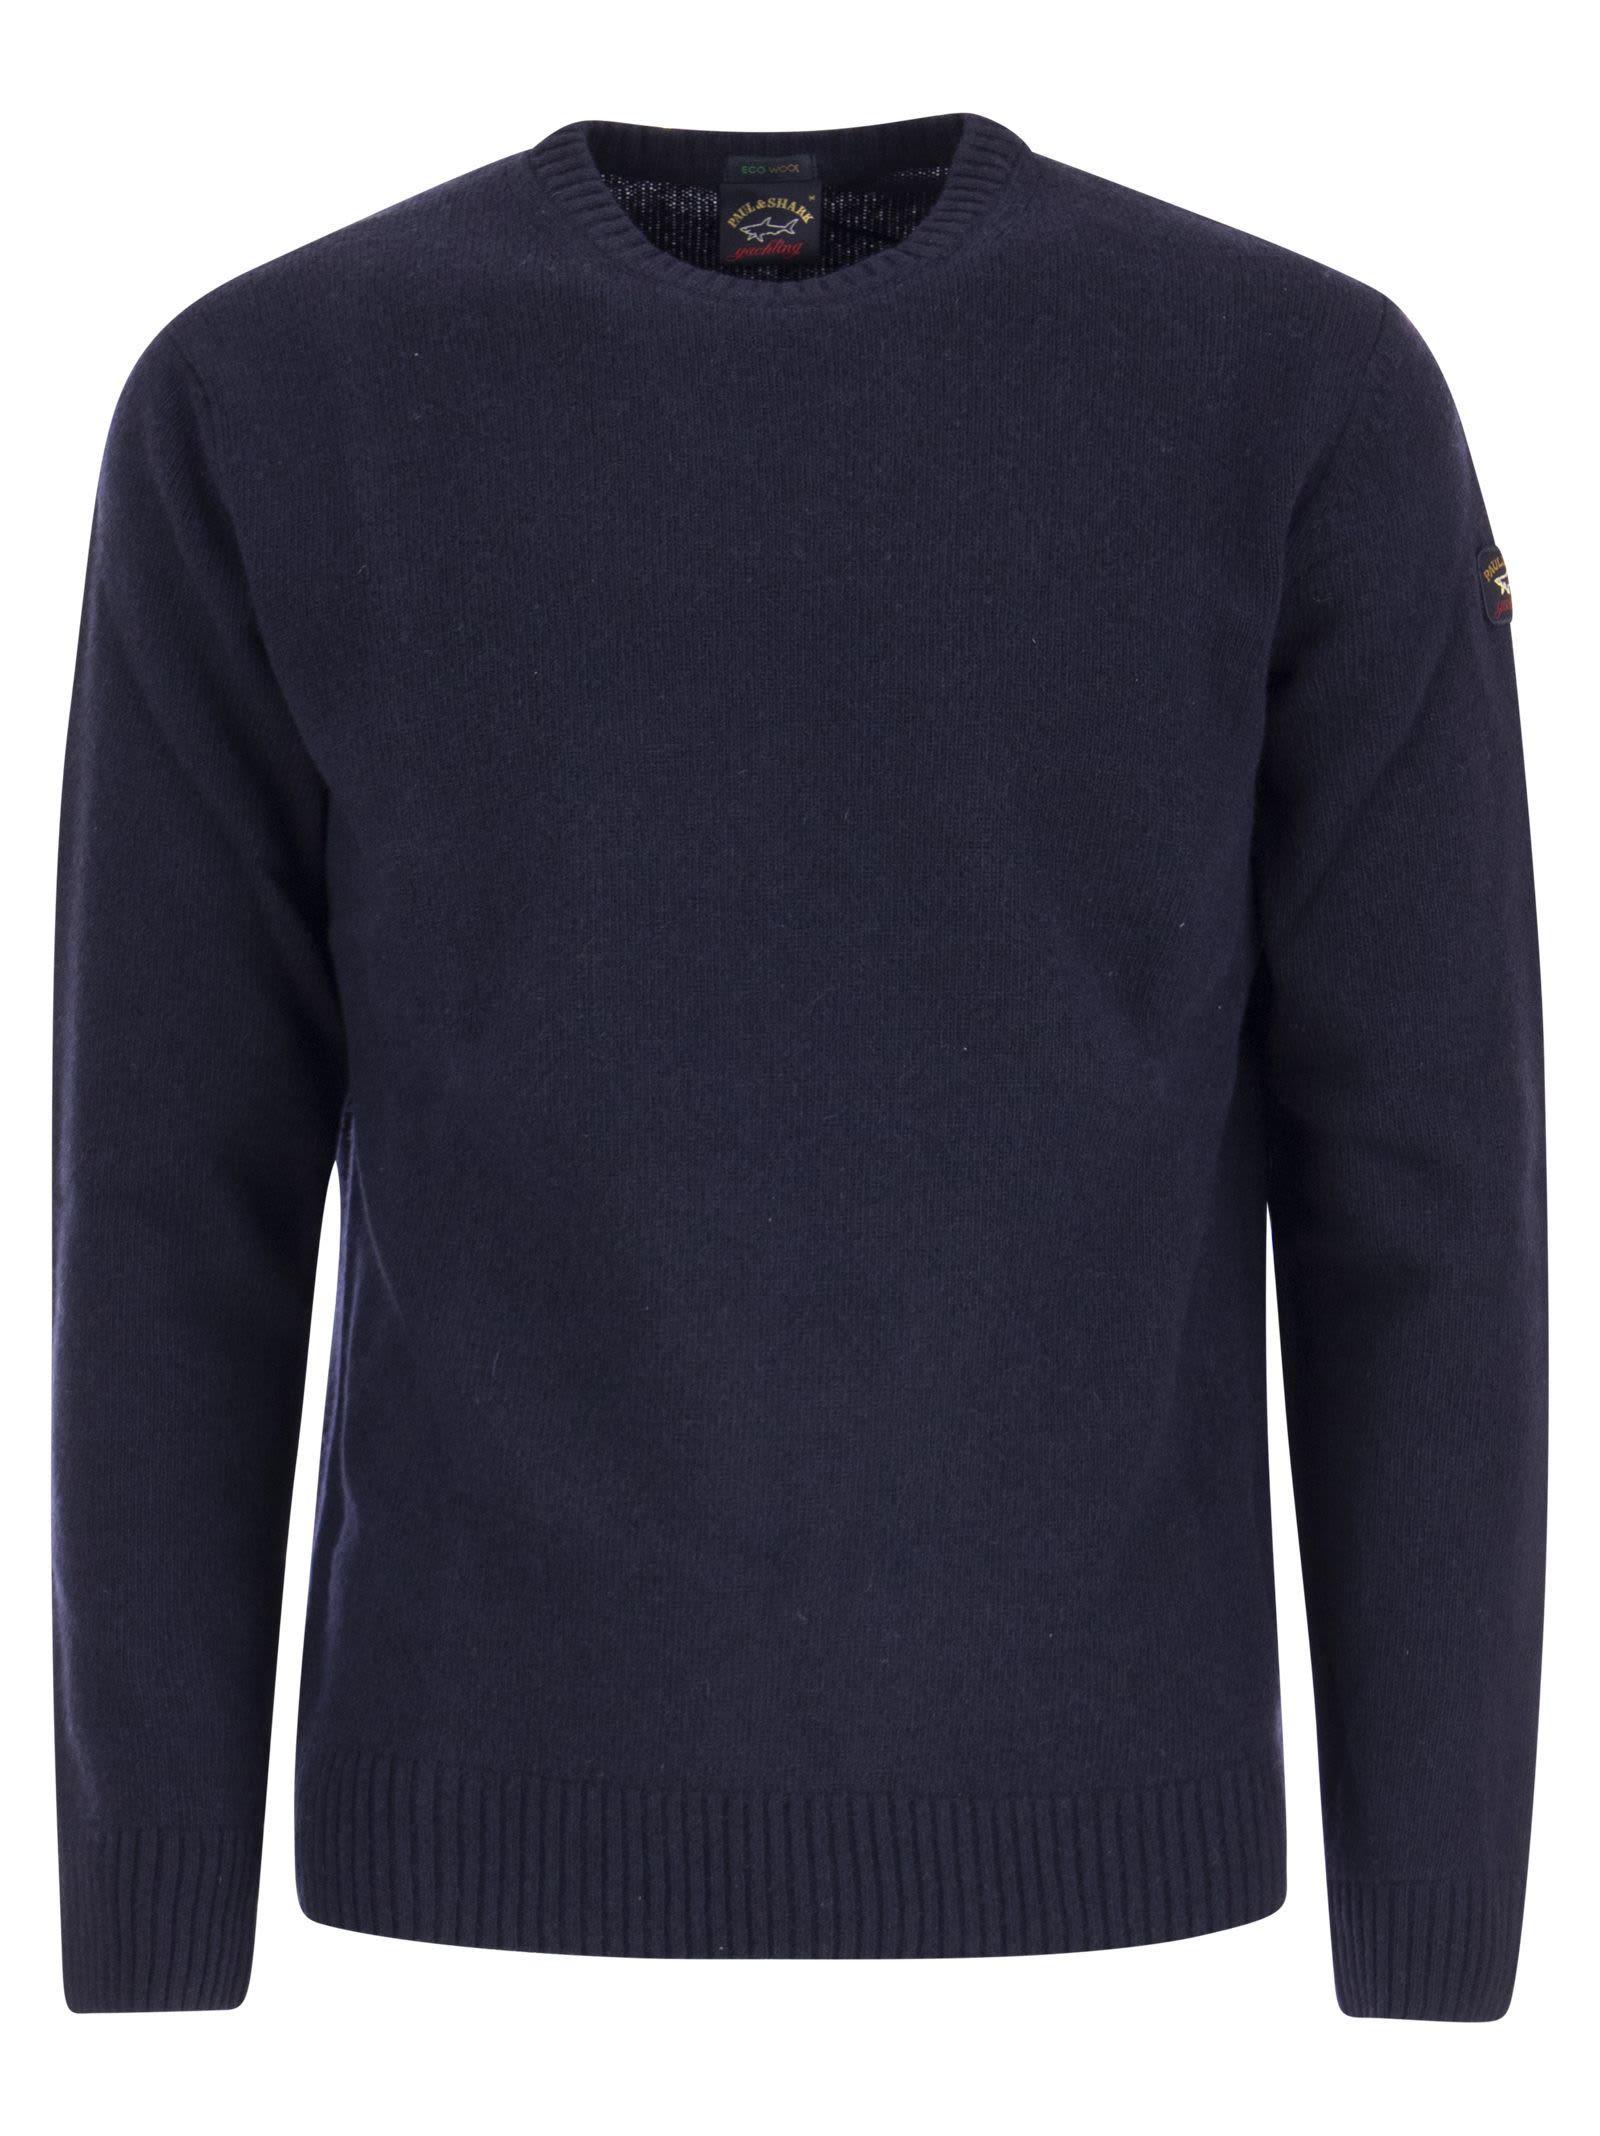 Paul&amp;shark Wool Crew Neck With Arm Patch In Blue